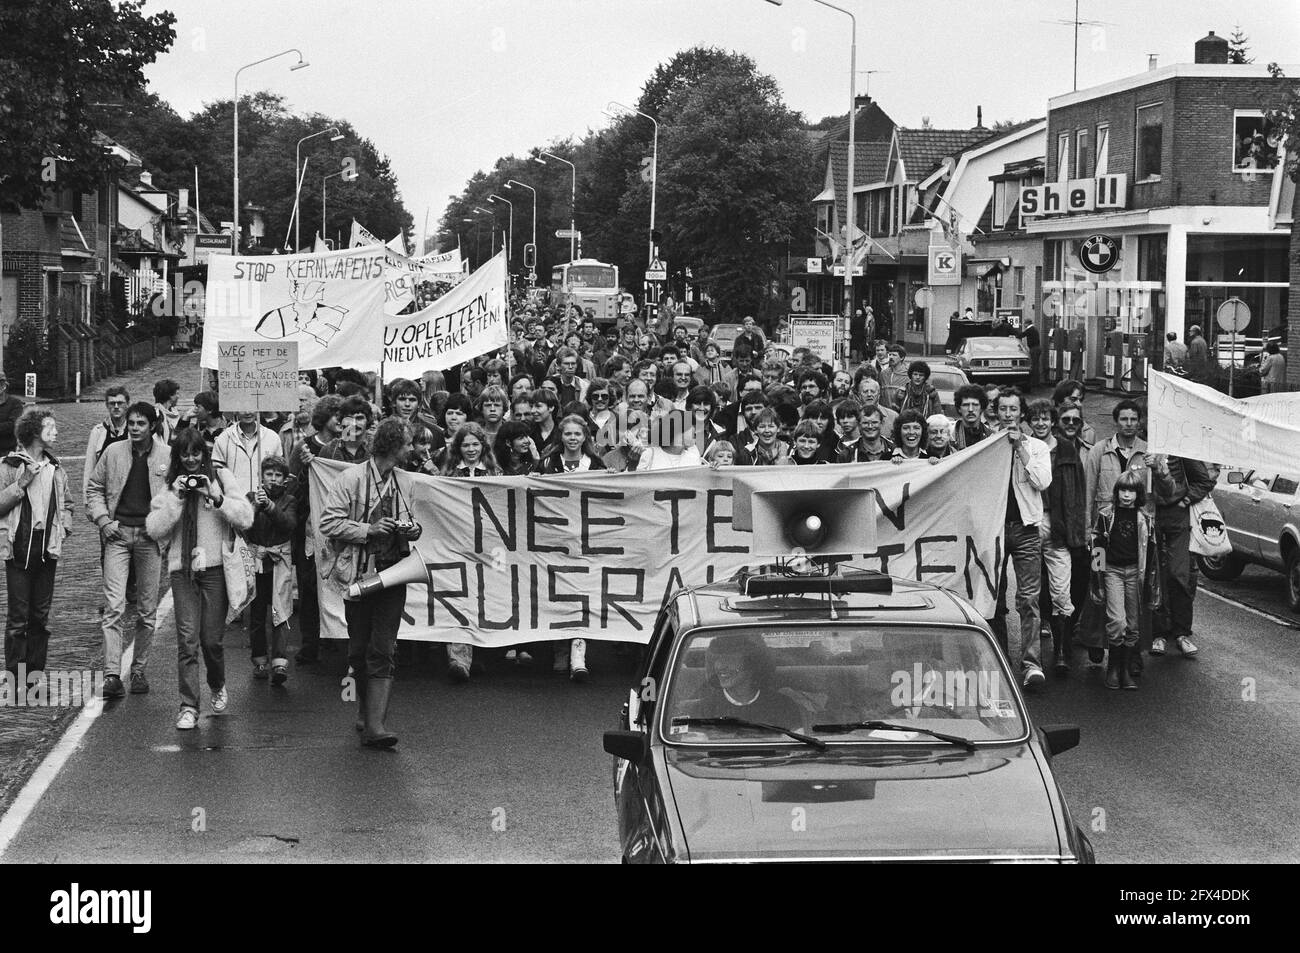 Demonstrators behind a banner, October 9, 1982, demonstrators, demonstrations, nuclear armament, parades, banners, The Netherlands, 20th century press agency photo, news to remember, documentary, historic photography 1945-1990, visual stories, human history of the Twentieth Century, capturing moments in time Stock Photo